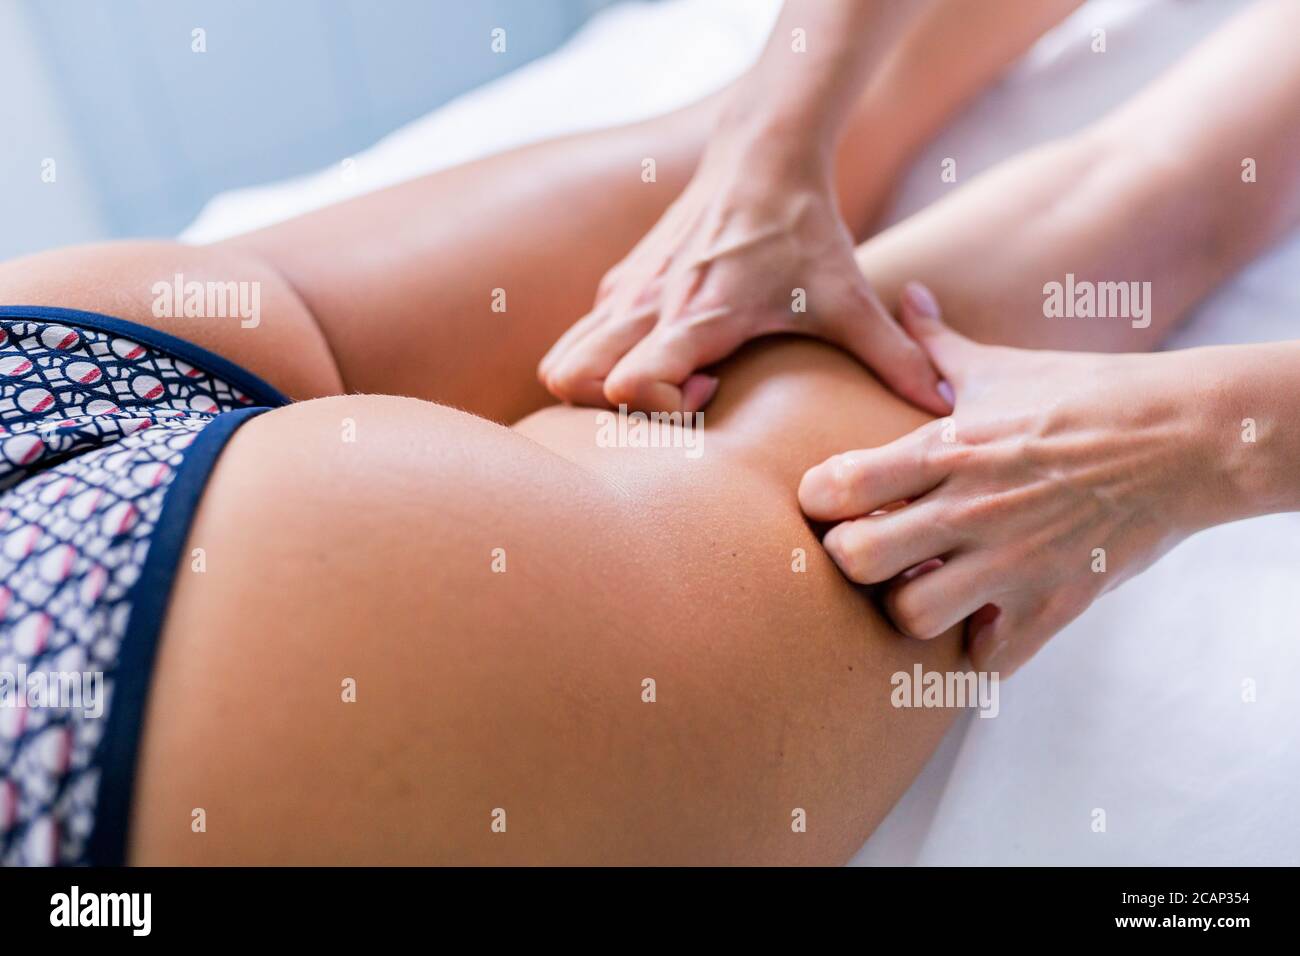 Legs and buttocks massage to reduce cellulite and phlebeurysm and preserve an healthy look image